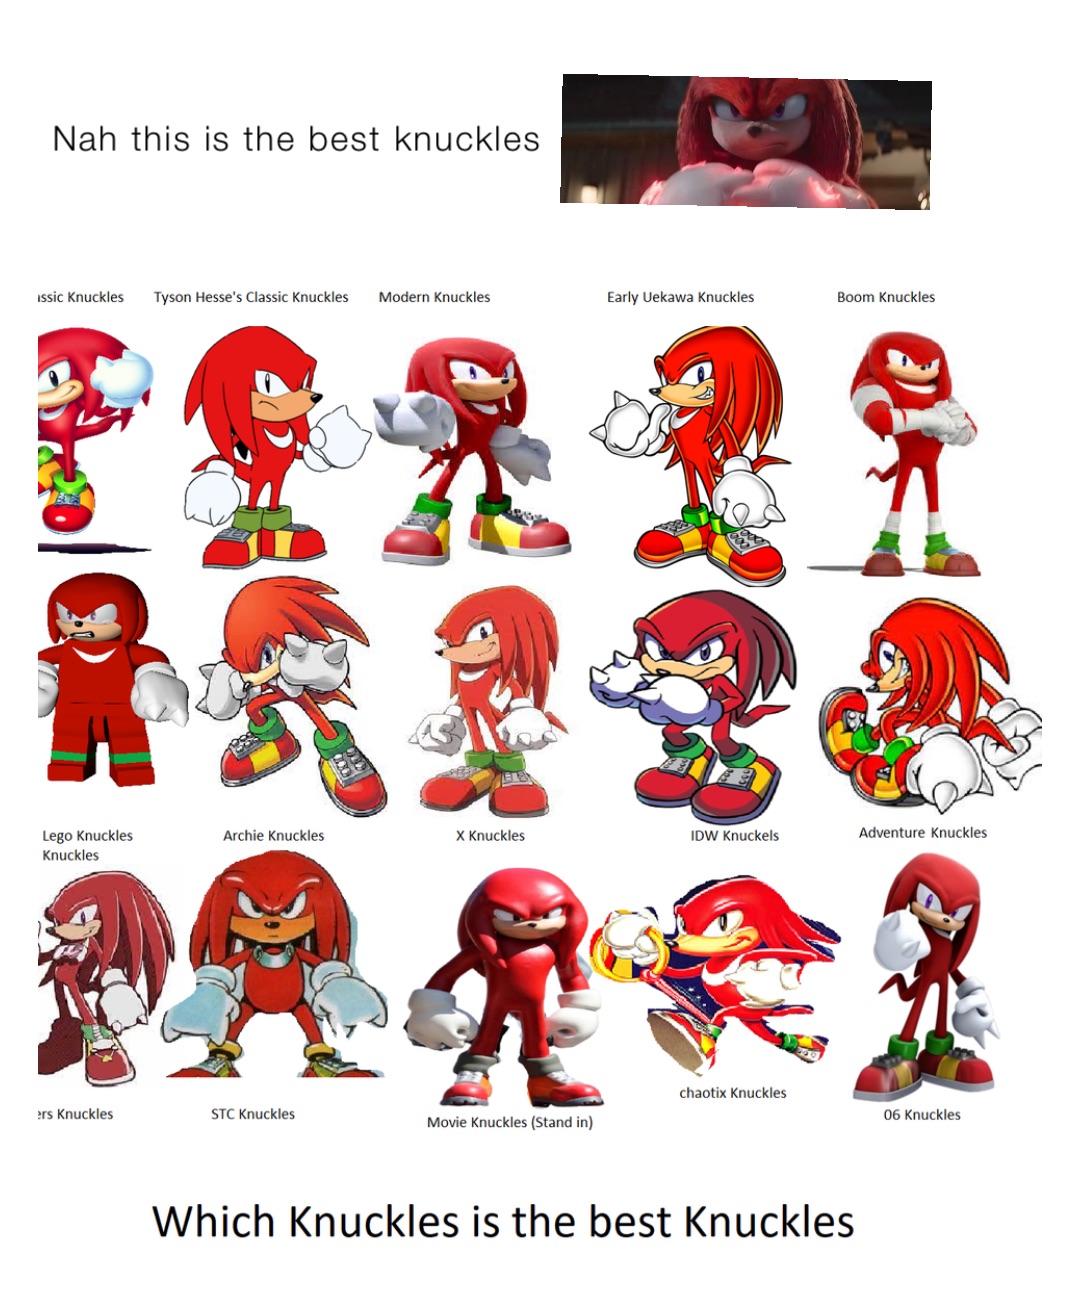 Nah this is the best knuckles